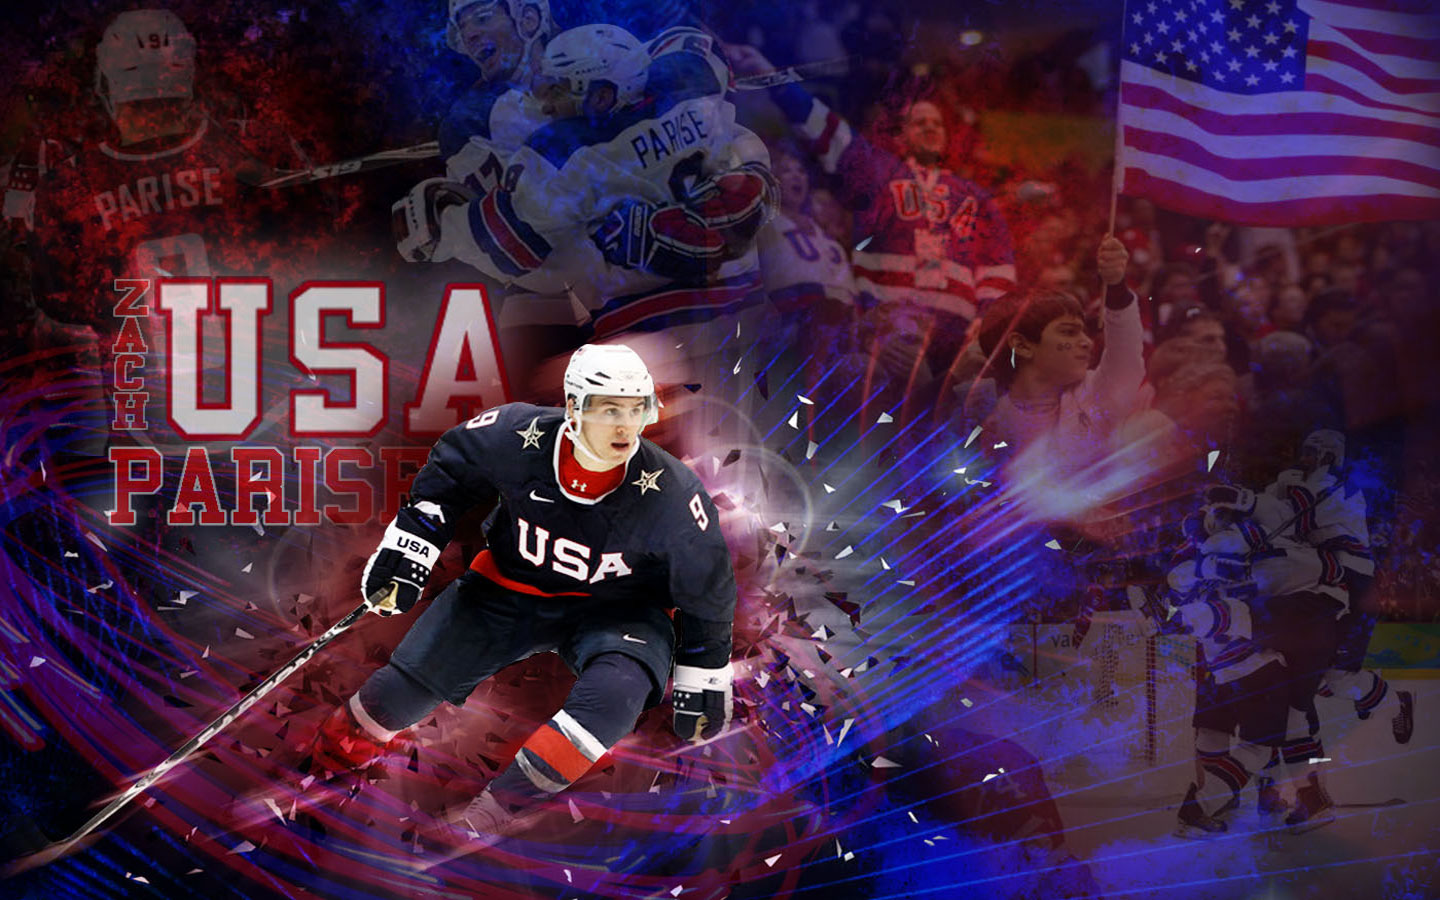 image Usa Hockey Wallpaper PC Android iPhone and iPad Wallpapers 1440x900